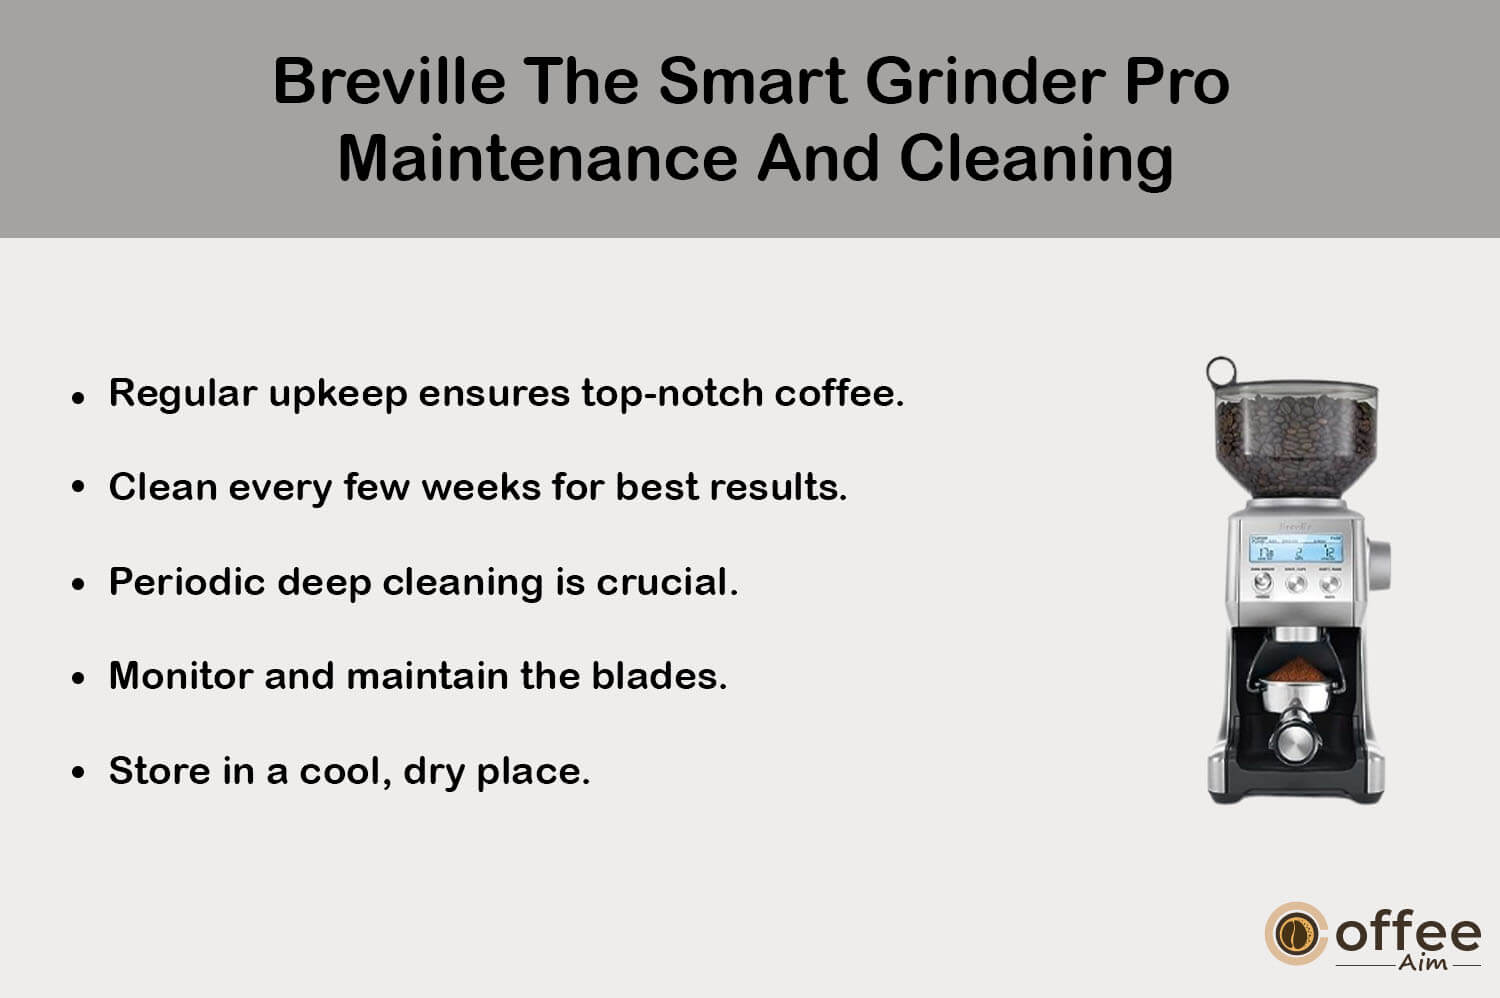 Illustrating the meticulous care and cleaning regimen for the "Breville The Smart Grinder Pro BCG820BSSXL," this image complements our comprehensive review, "Breville The Smart Grinder Pro BCG820BSSXL Review." Delve into effective maintenance practices and ensure your coffee grinding experience remains exceptional.